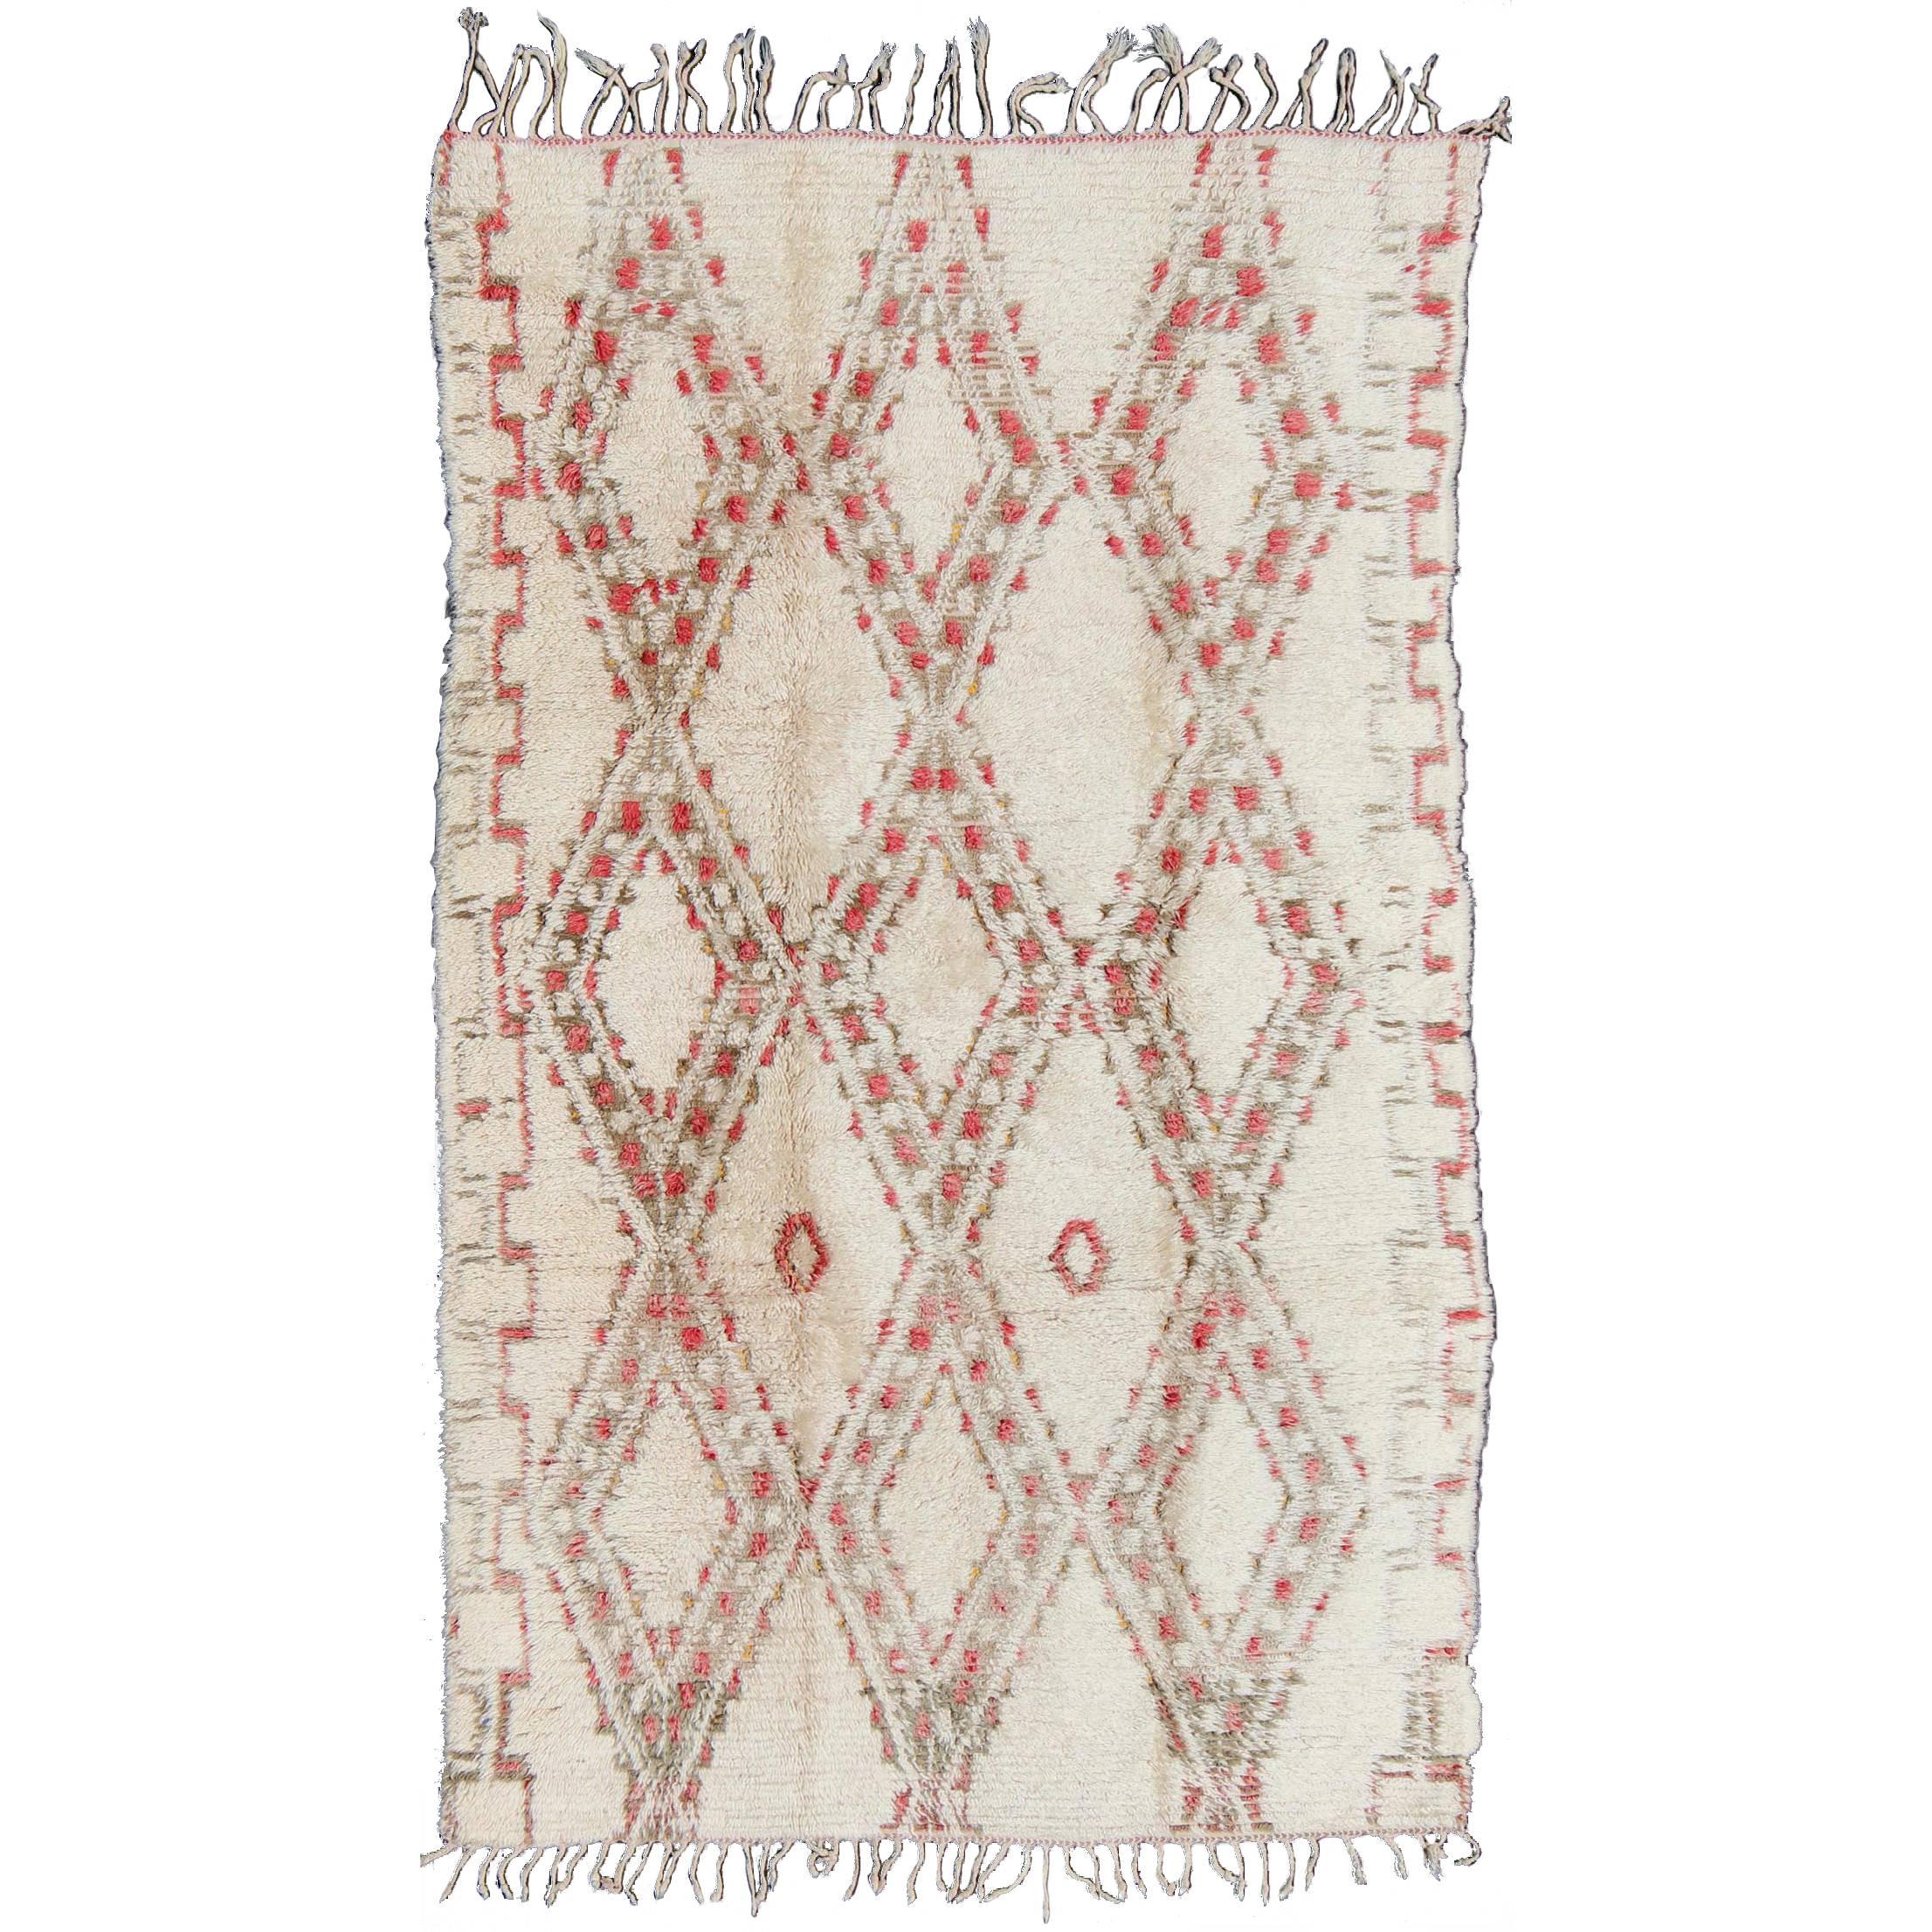 Vintage Beni Ouarain Moroccan Rug in White, Ivory, Taupe, Green and Rose Colors